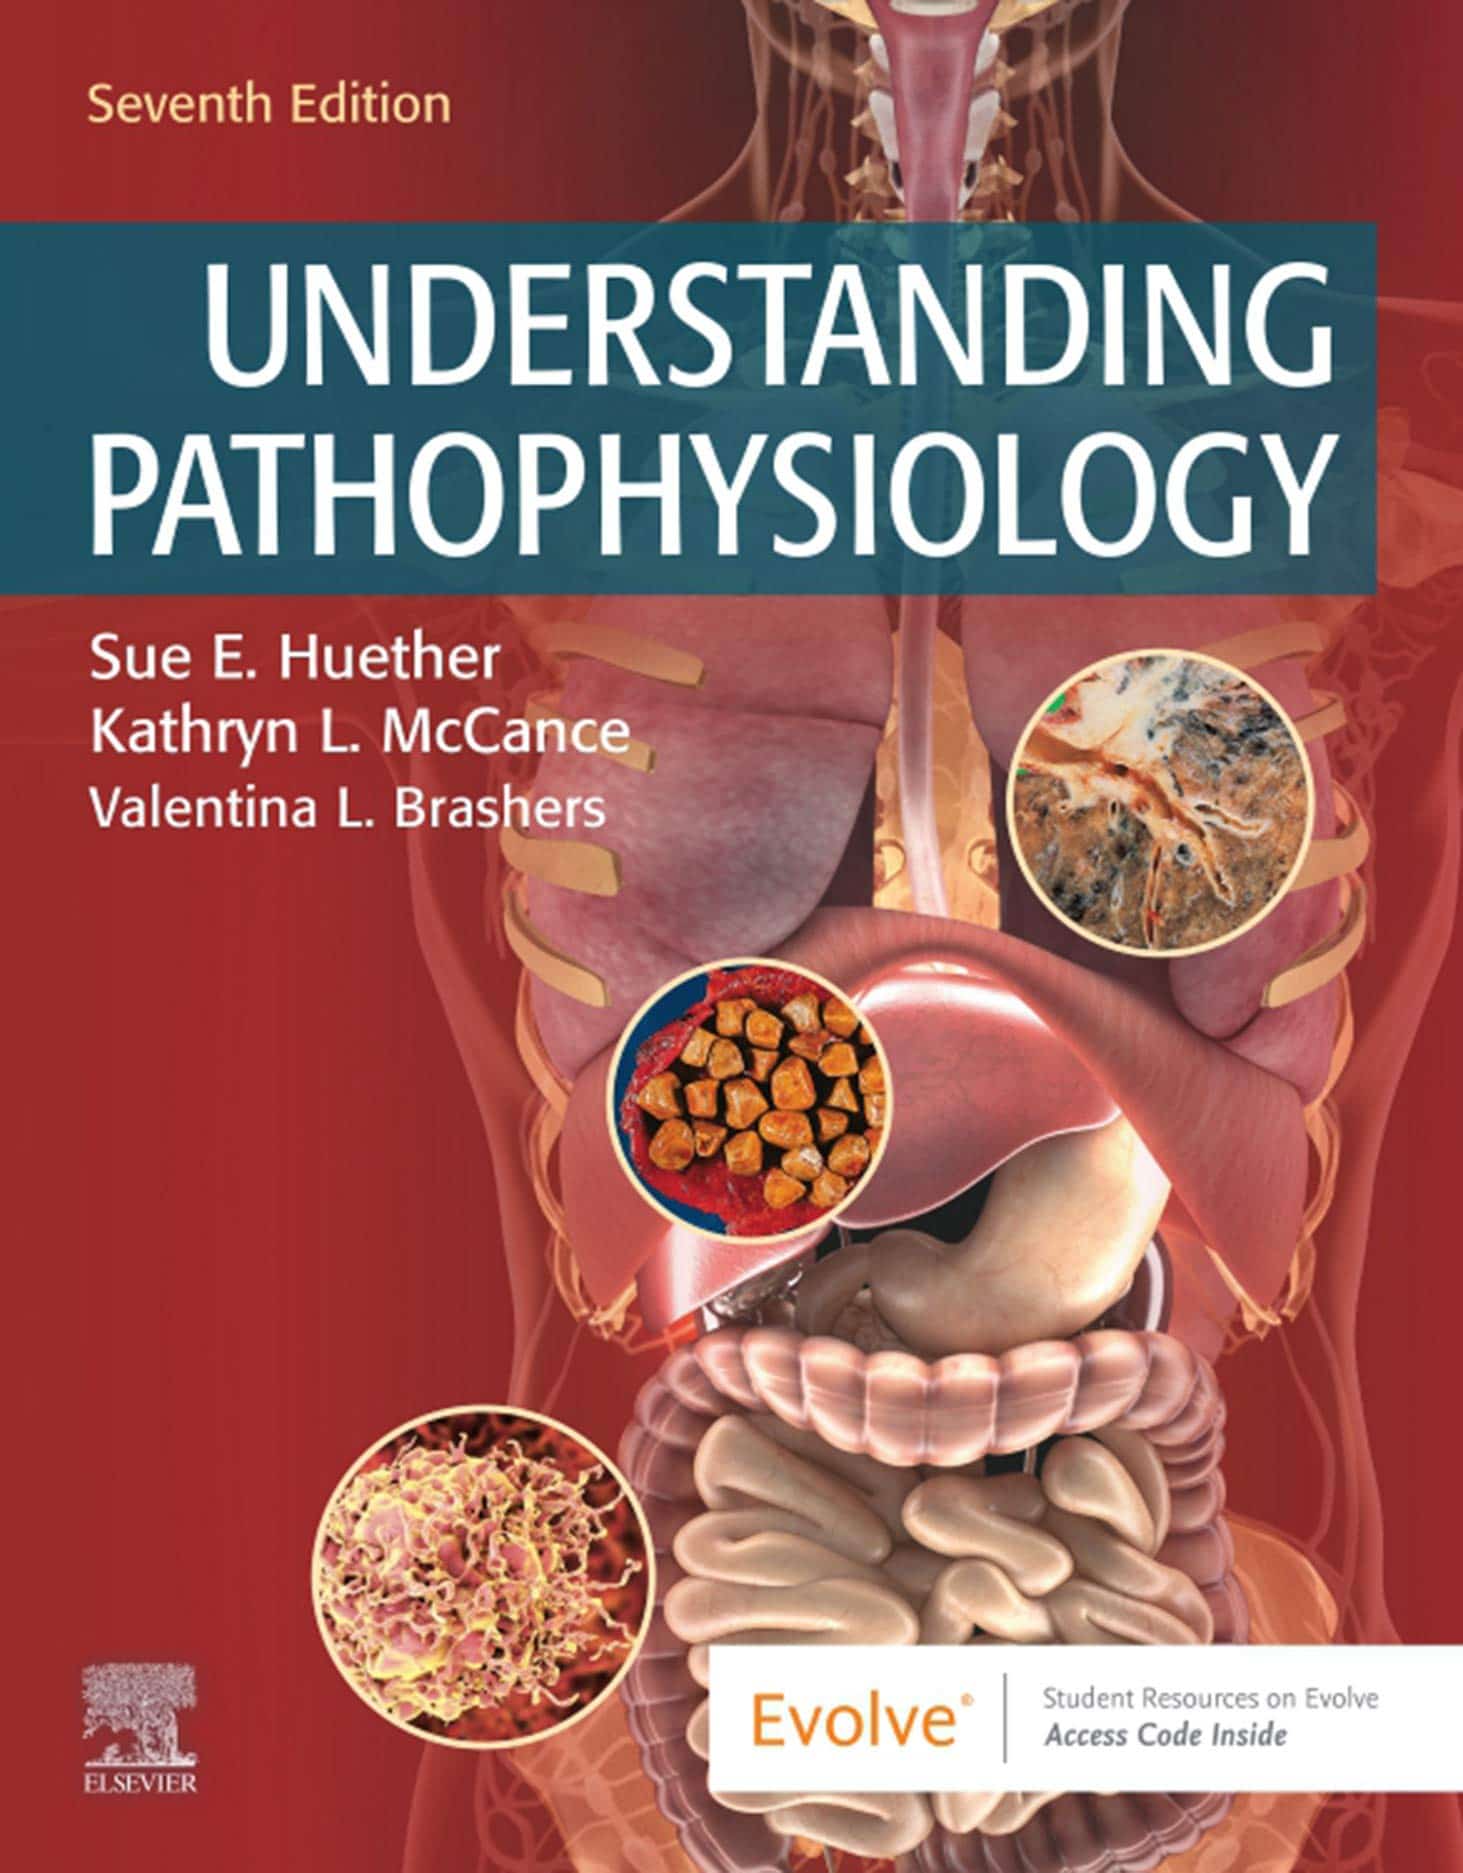 TEST BANK FOR UNDERSTANDING PATHOPHYSIOLOGY 7TH EDITION BY SUE HUENTHER